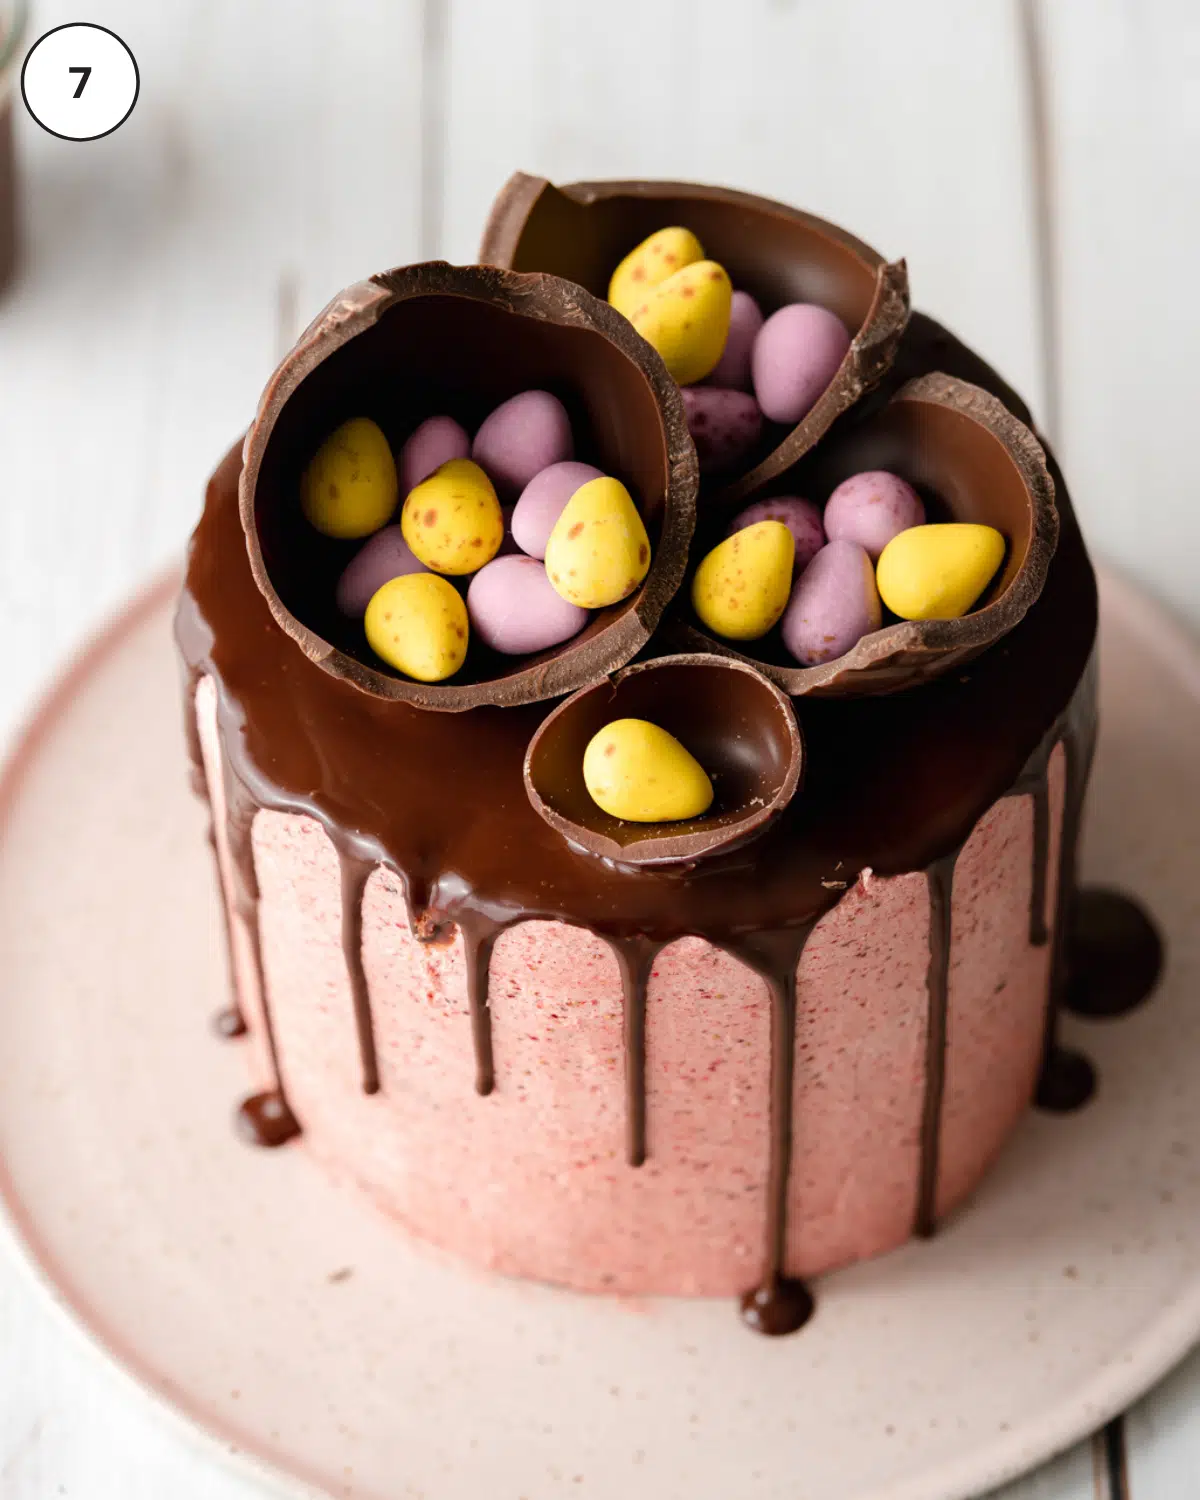 pink cake with chocolate ganache drip on a ceramic plate with easter eggs on top.